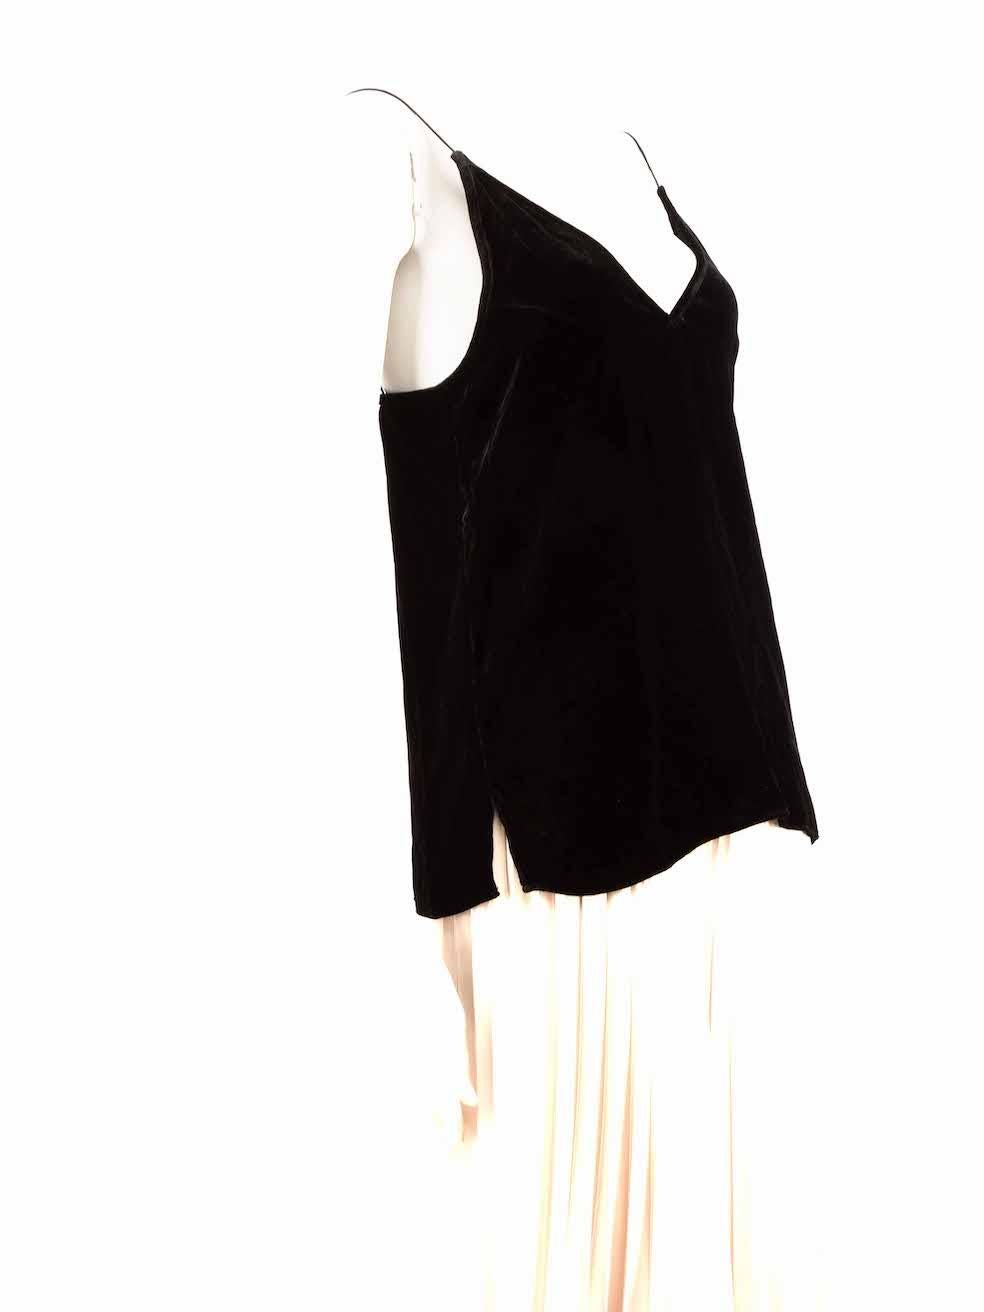 CONDITION is Very good. Hardly any visible wear to top is evident on this used CAMI designer resale item.
 
 Details
 Black
 Velvet
 Tank top
 Spaghetti strap
 V-neck
 
 
 Made in China
 
 Composition
 82% Viscose, 18% Silk
 
 Care instructions: